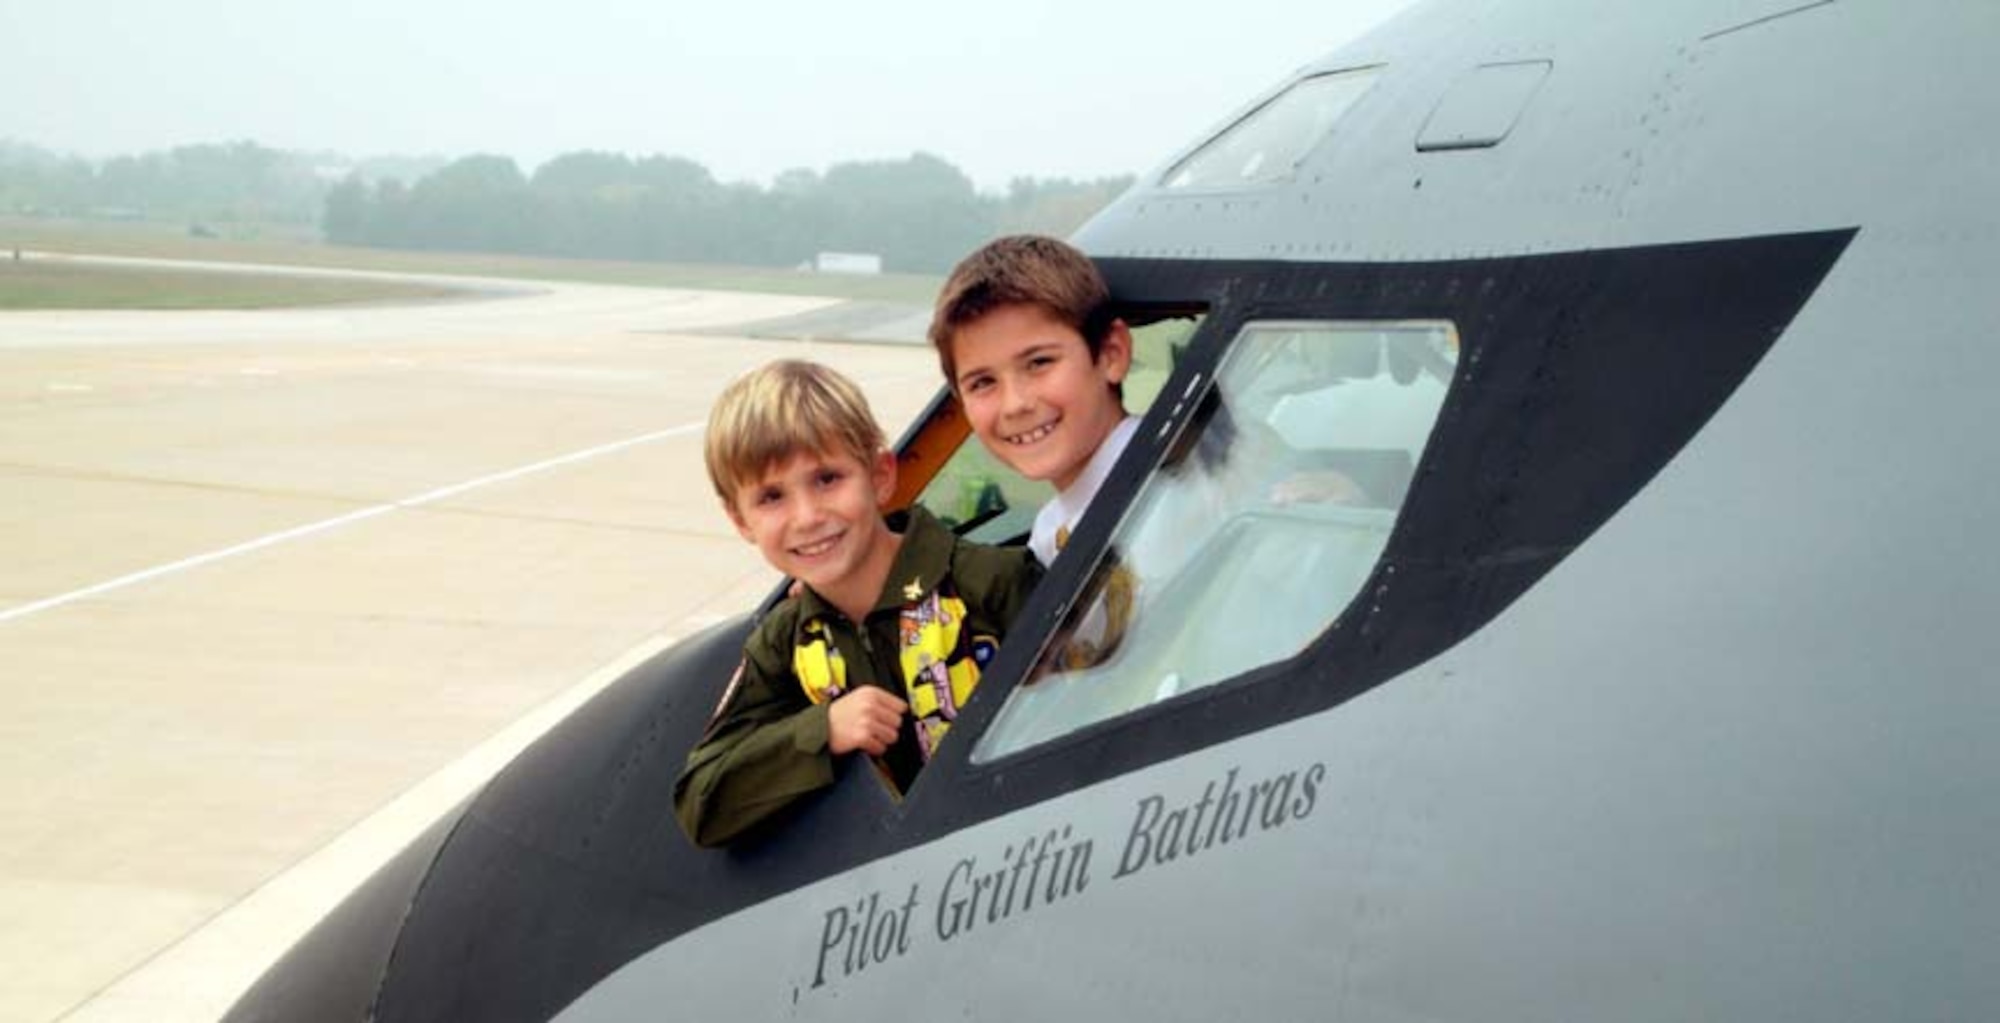 ANDREWS AIR FORCE BASE, Md. -- (Foreground) Griffin Bathras, 7, and his brother Camden, 9, smile from the cockpit of a KC-135 tanker jet during their tour here Oct. 4. Griffin was the guest of honor as part of the D.C. Air National Guard and 459th Air Refueling Wing joint venture "Pilot for a Day" here Oct. 4. The outreach program offers aircraft and squadron tours, lunch and full accommodations for children with serious or chronic conditions. The child also receives a personal pilot flight suit as he or she takes the pilot's oath. (U.S. Air Force photo/Staff Sgt. Amaani Lyle)